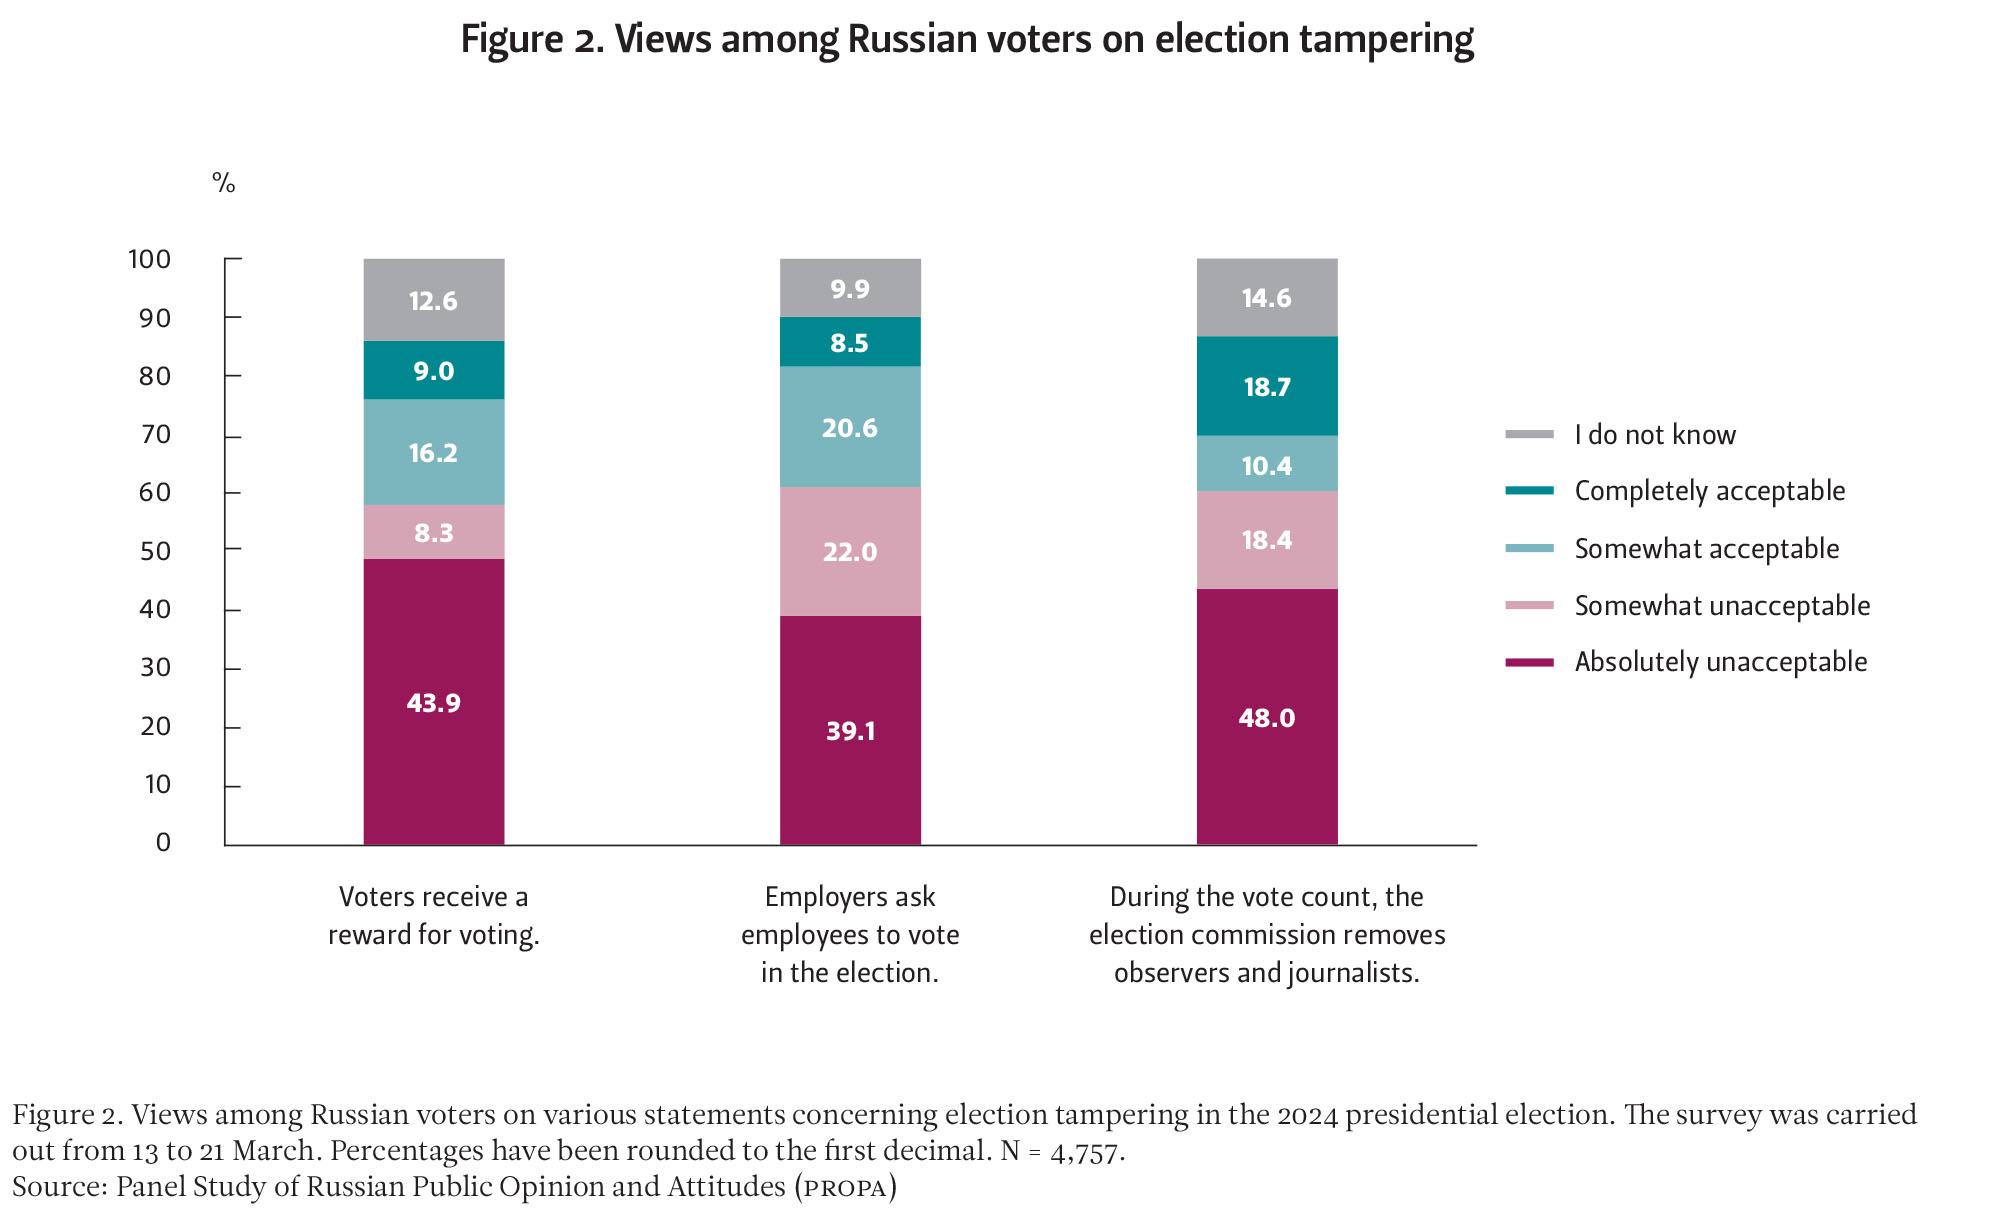 Three pillars depicting views among Russian voters on election tampering.